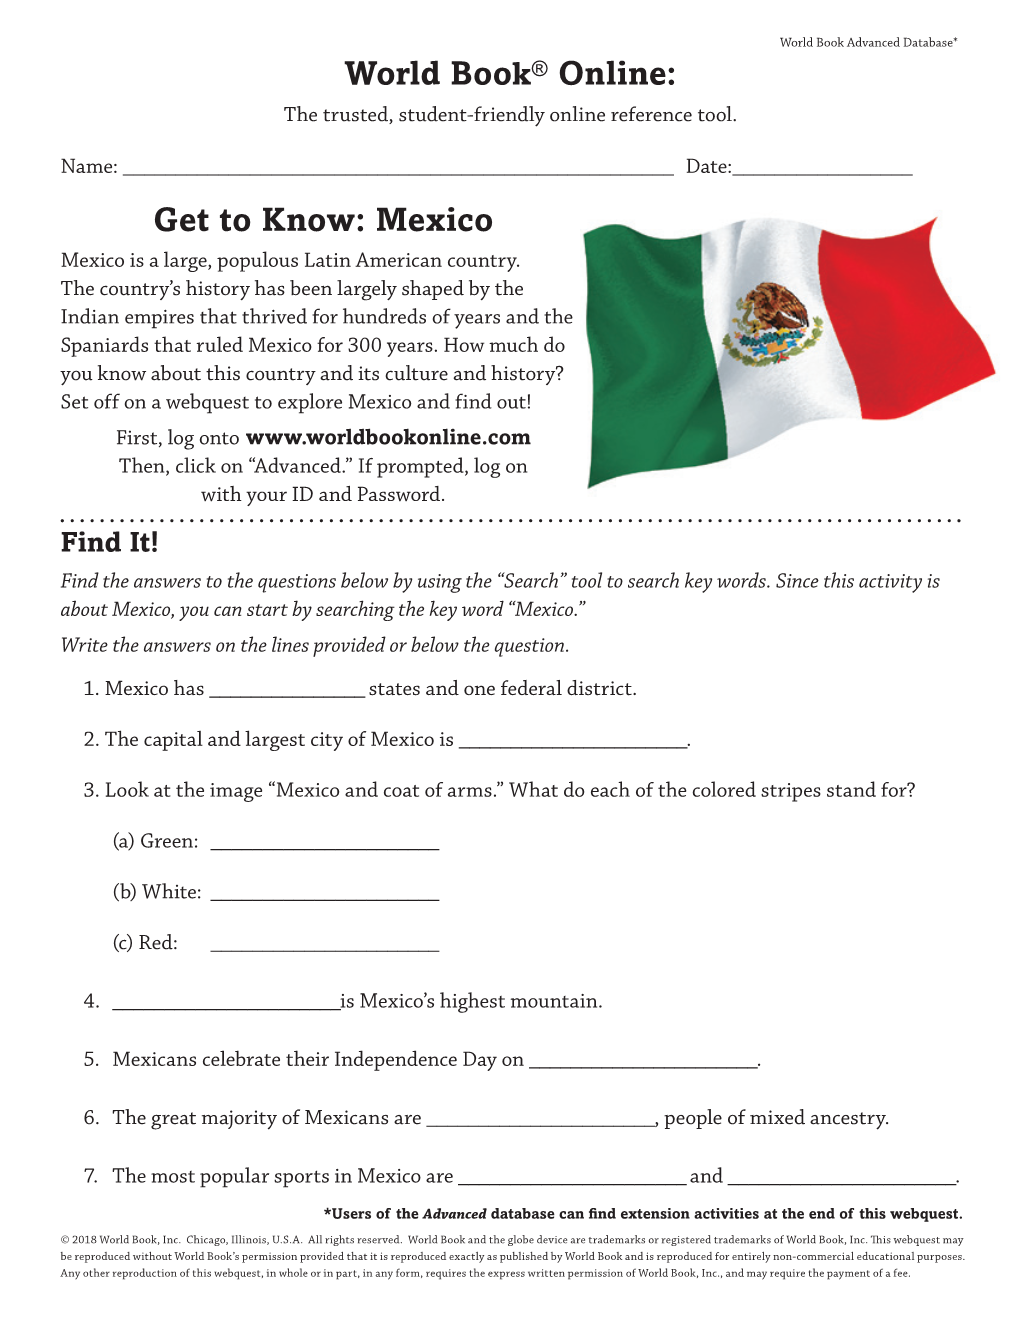 Get to Know: Mexico World Book® Online